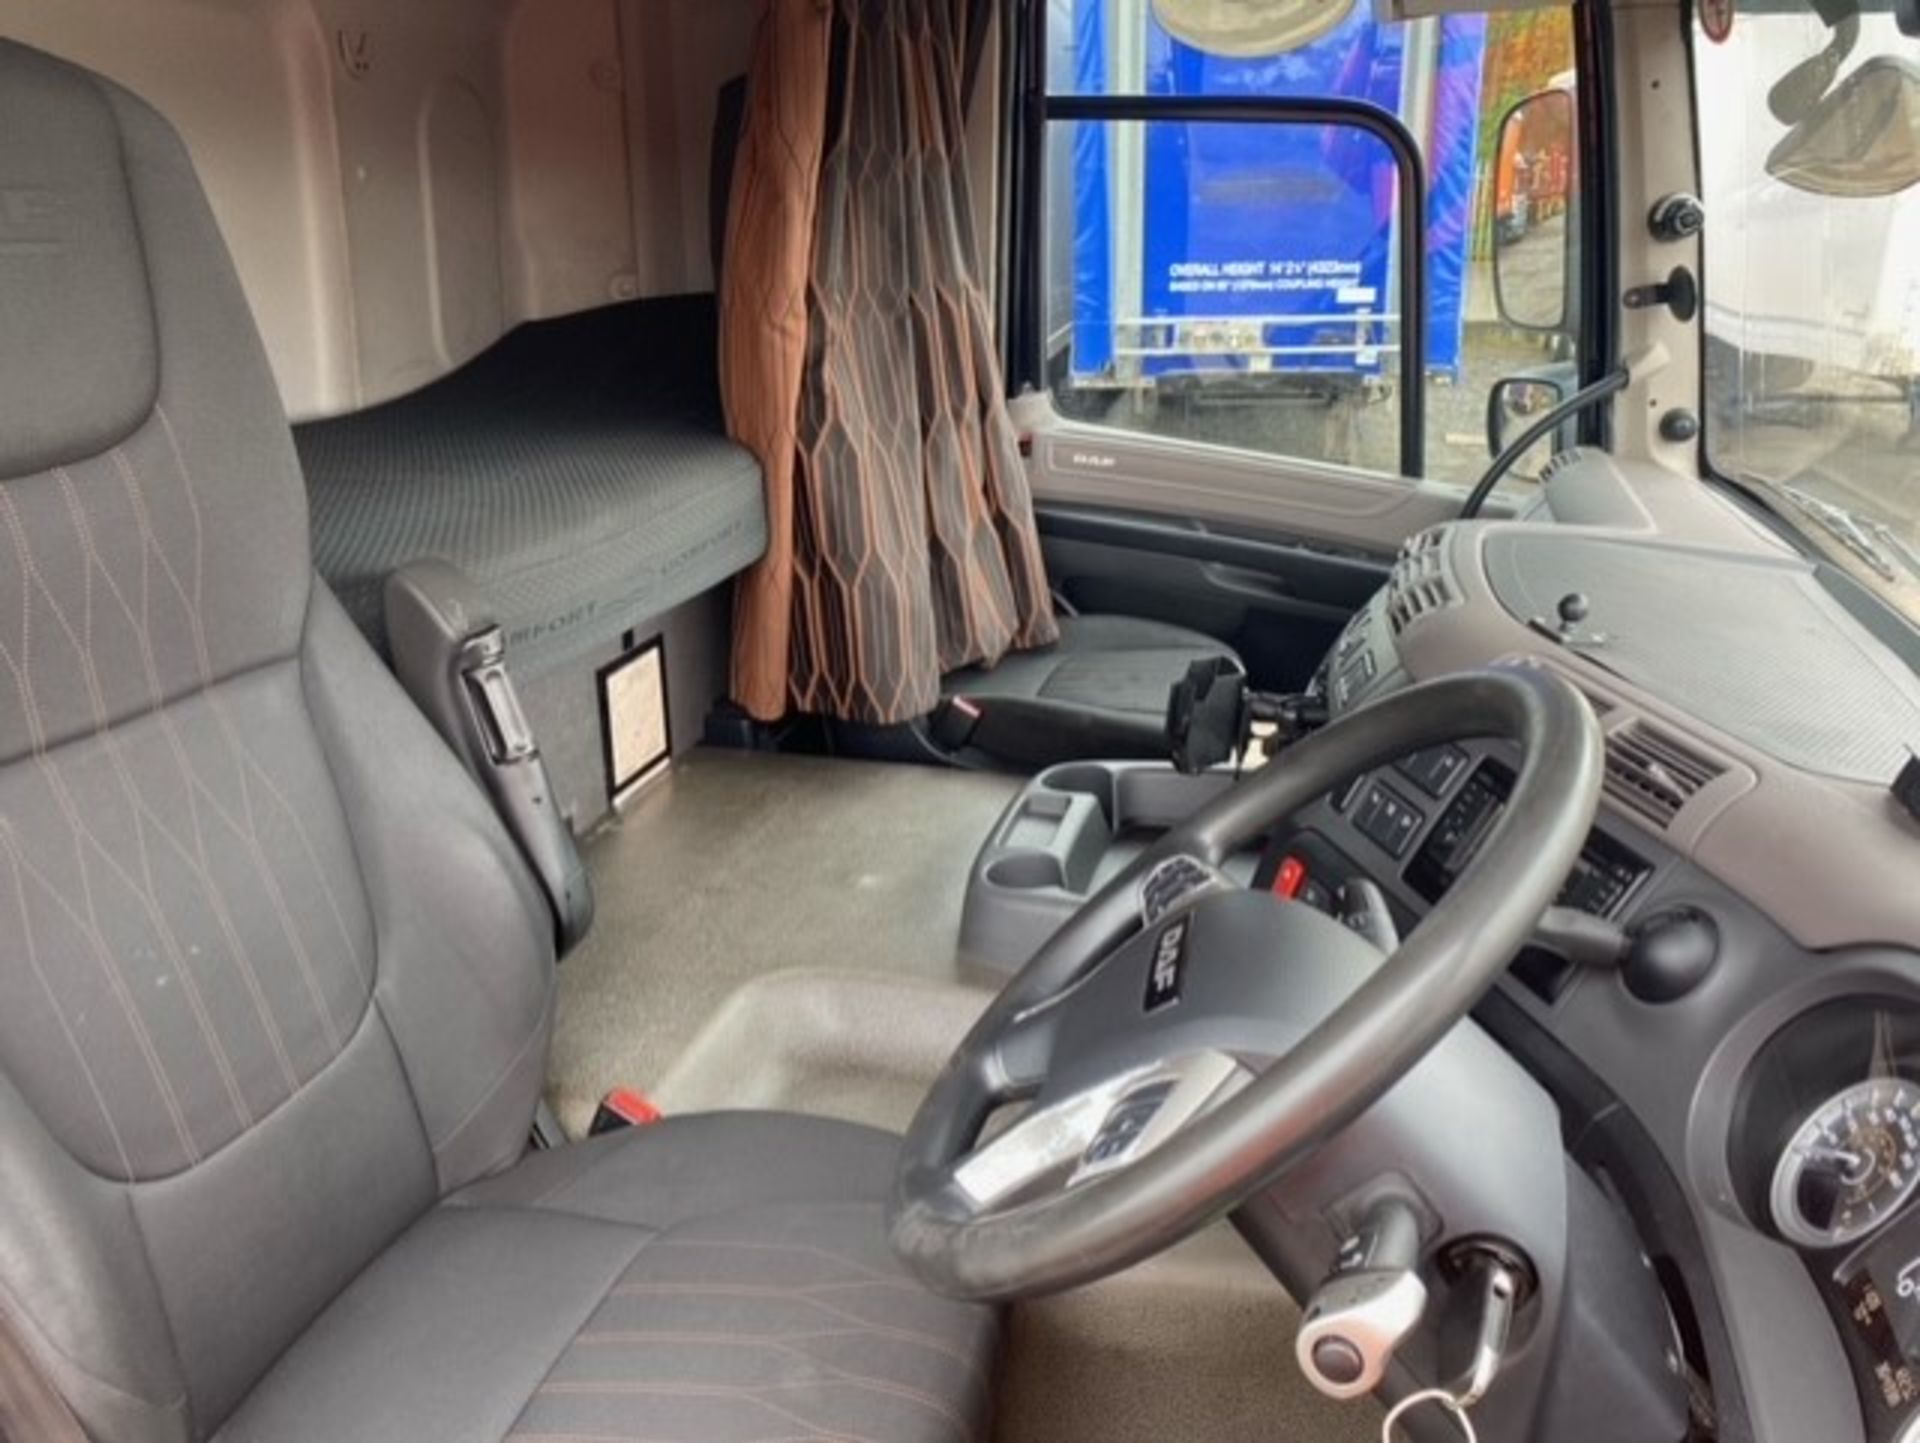 2019, DAF CF 260 FA (Ex-Fleet Owned & Maintained) - FN69 AXG (18 Ton Rigid Truck with Tail Lift) - Image 15 of 16